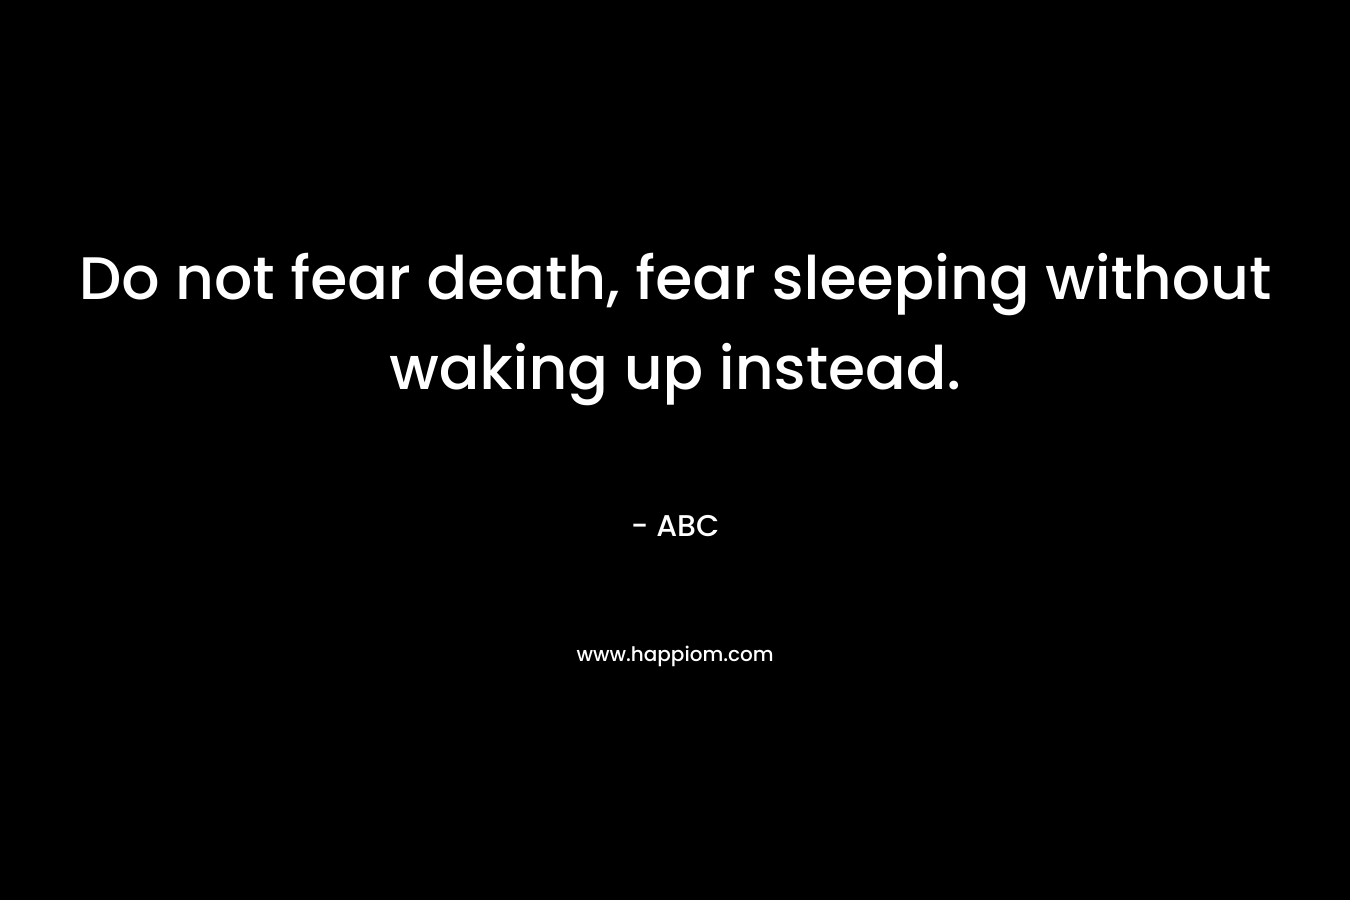 Do not fear death, fear sleeping without waking up instead.